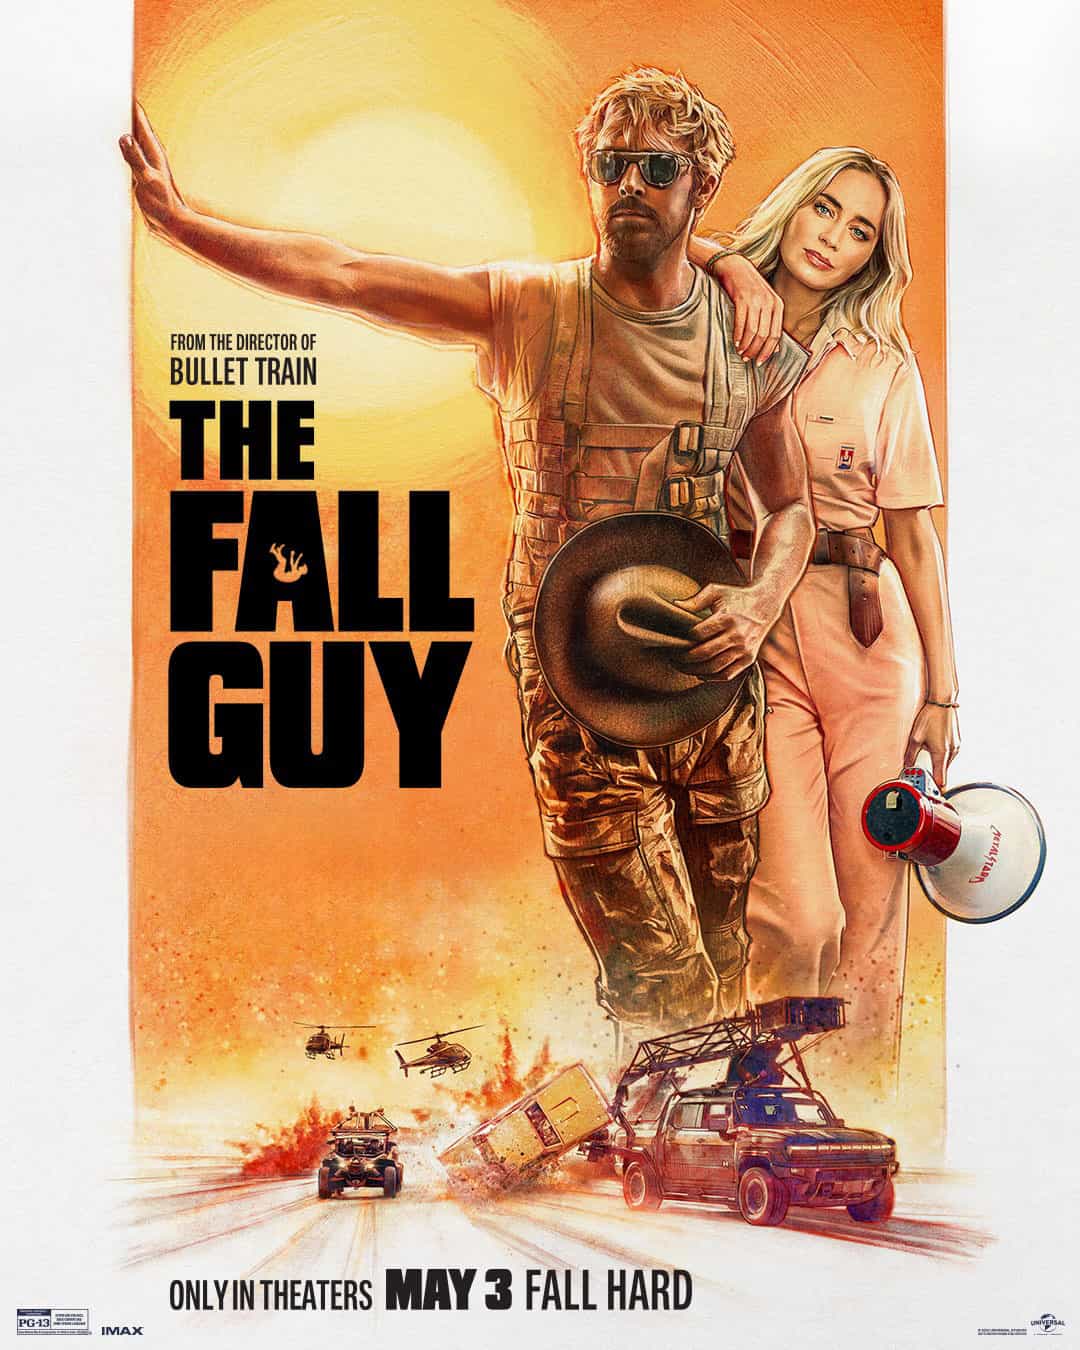 New poster has been released for The Fall Guy which stars Ryan Gosling and Emily Blunt - movie UK release date 2nd May 2024 #thefallguy